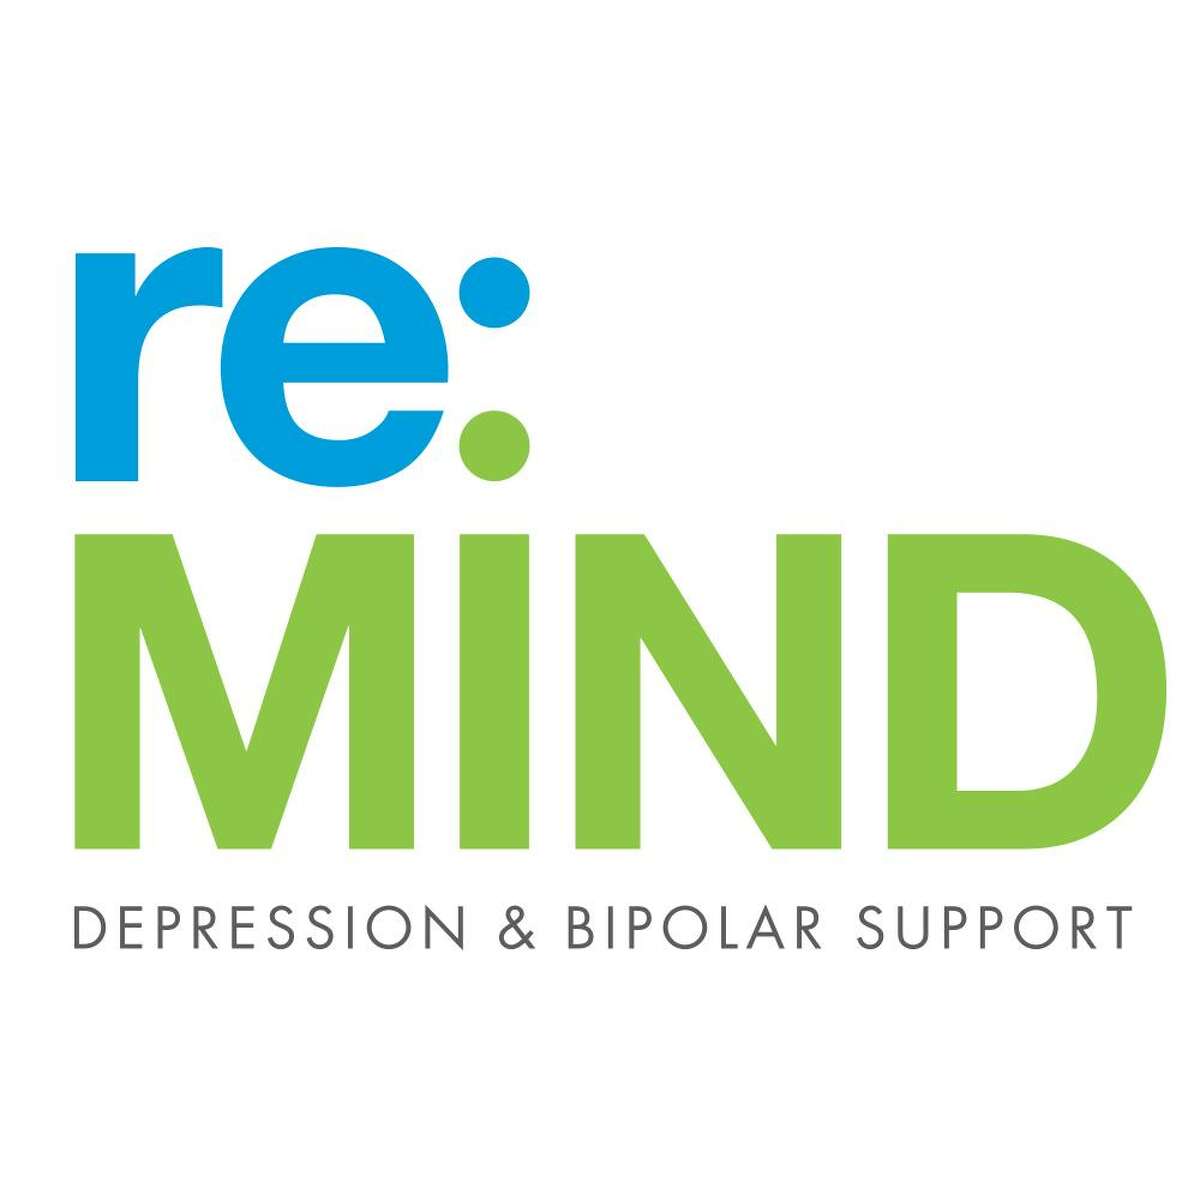 Re:MIND offers 80 support groups at 65 sites across the greater Houston area for adults and adolescents experiencing depression and bipolar disorder and their friends and family members. The groups are free, confidential and require no registration: participants just need to show up.